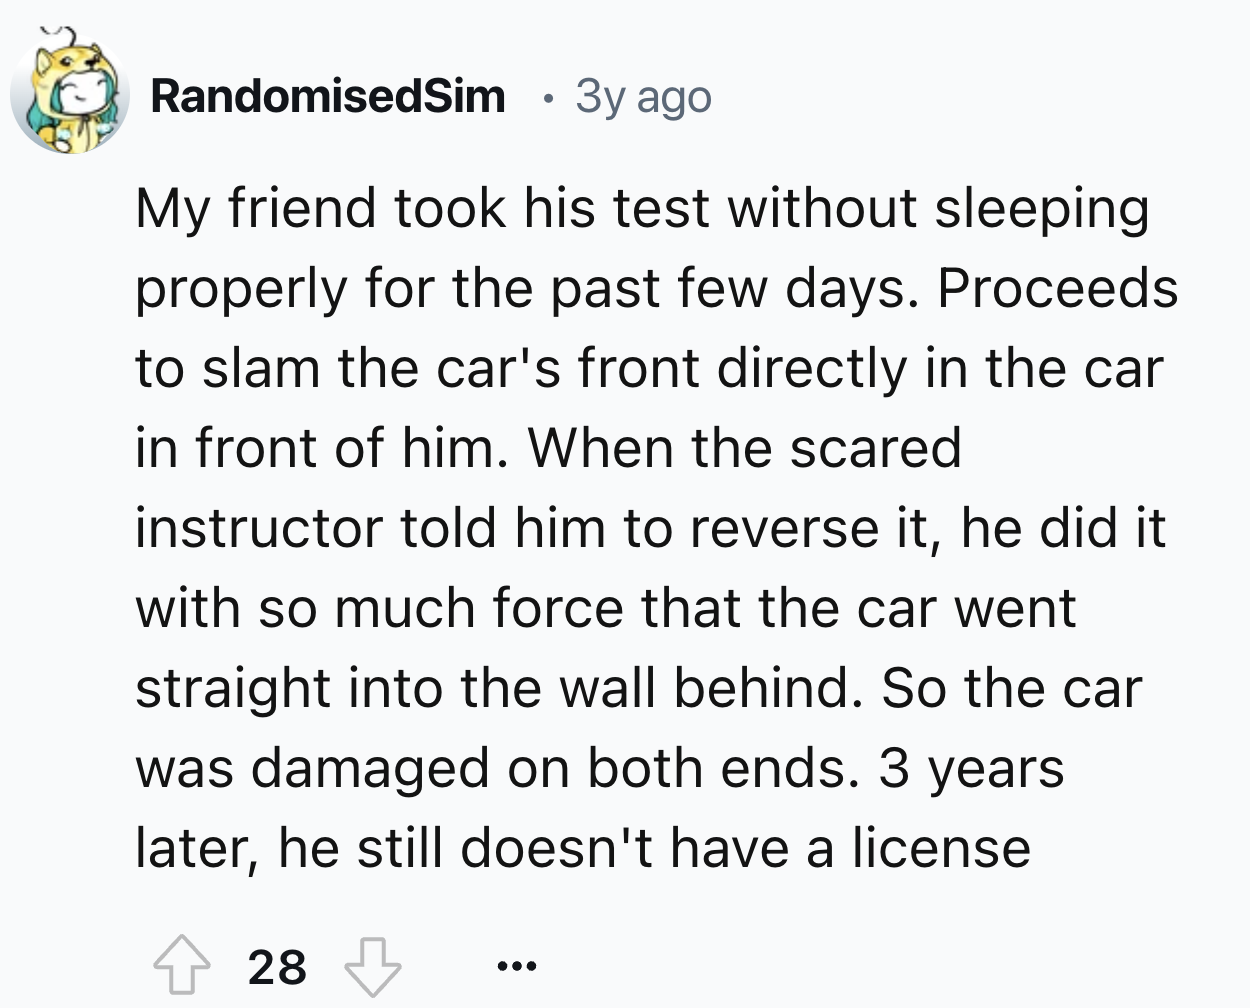 number - RandomisedSim 3y ago My friend took his test without sleeping properly for the past few days. Proceeds to slam the car's front directly in the car in front of him. When the scared instructor told him to reverse it, he did it with so much force th